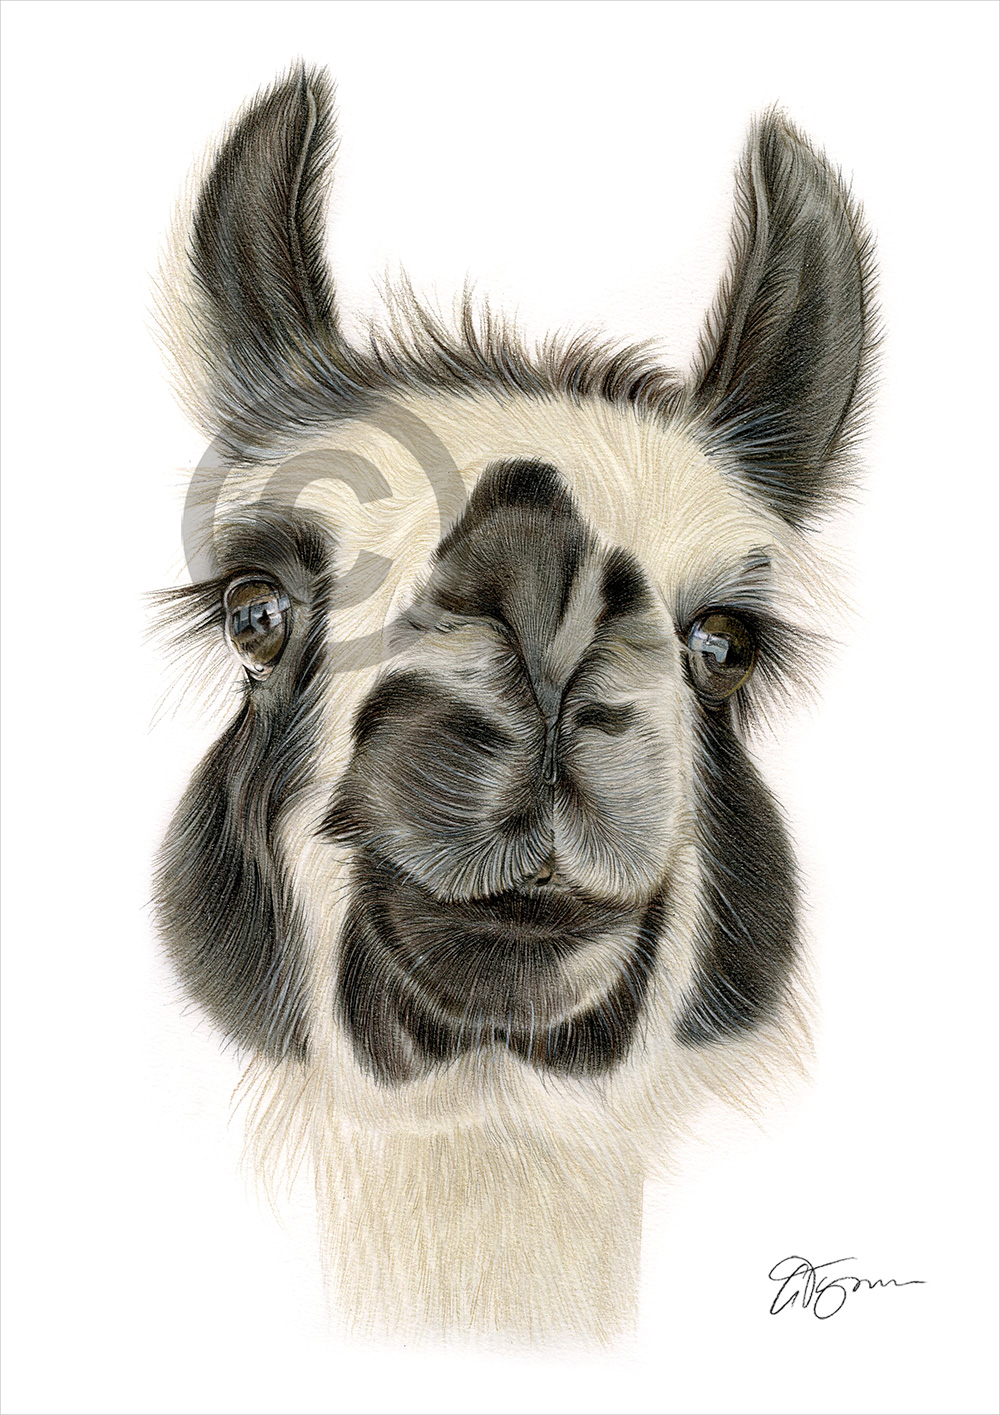 Pencil drawing commission of a llama by artist Gary Tymon